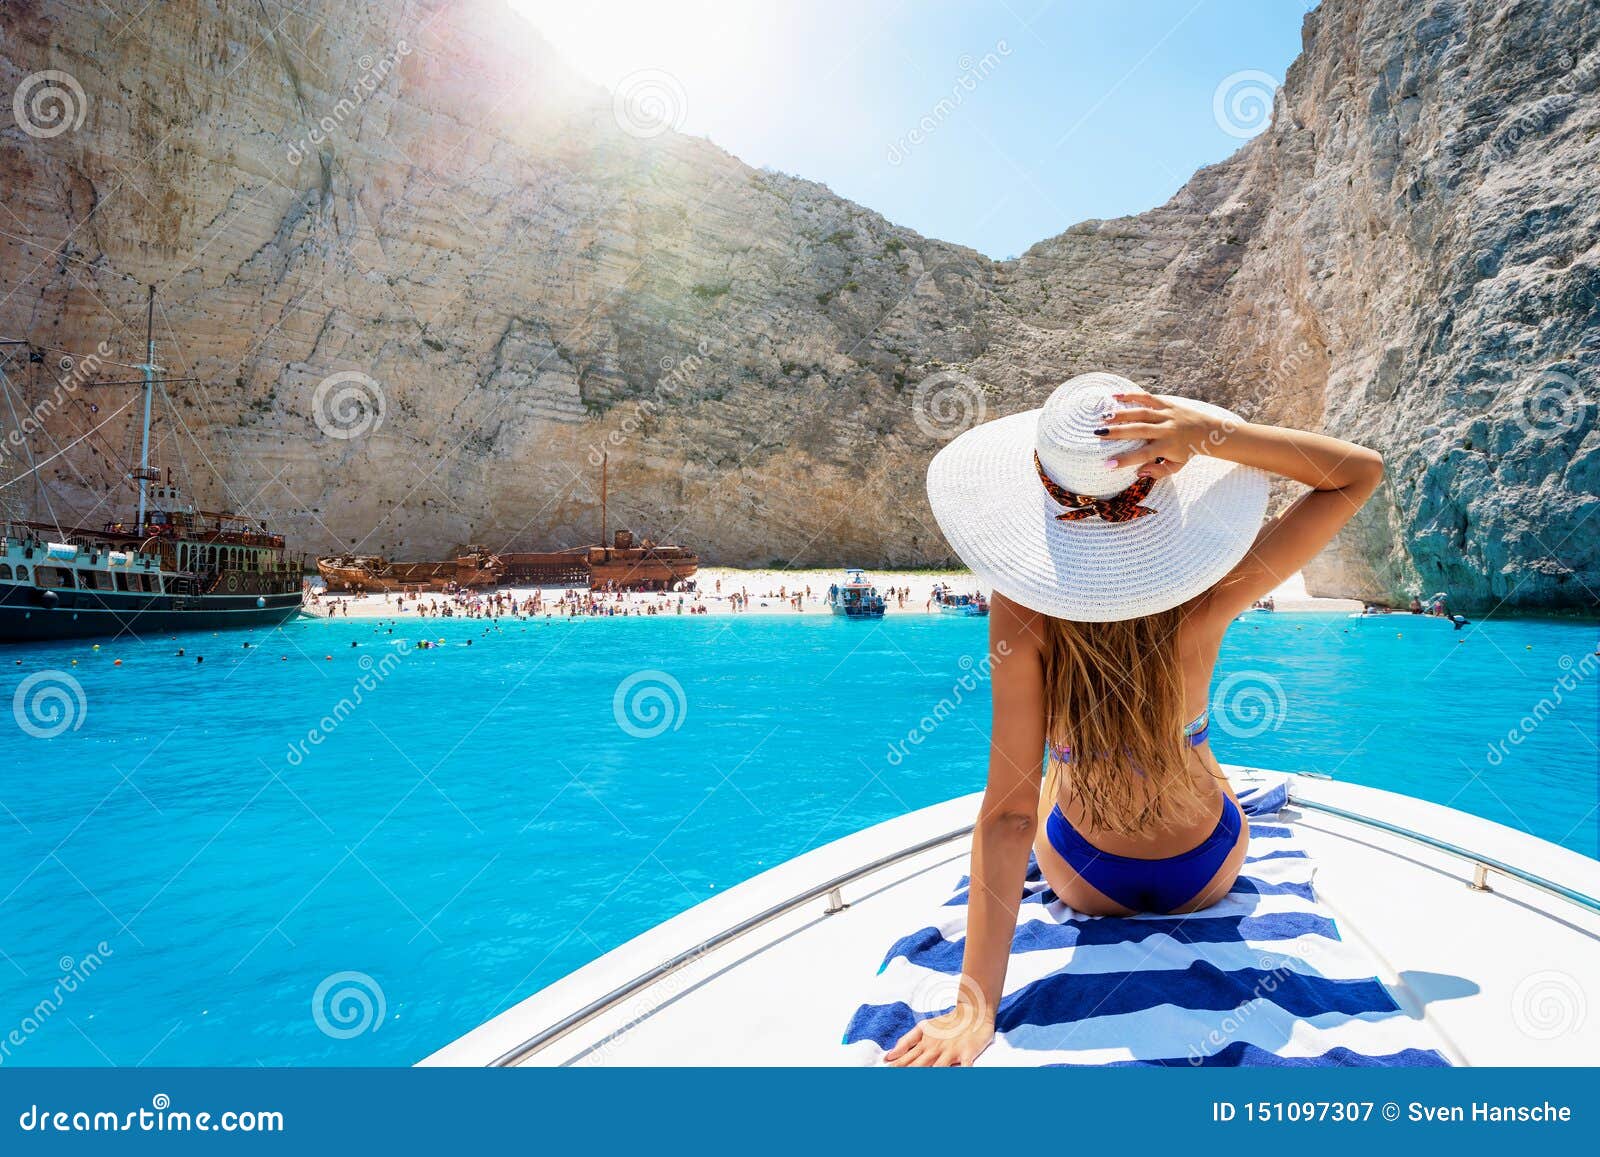 woman on a boat enjoys the view to the shipwreck beach, navagio in zakynthos, greece